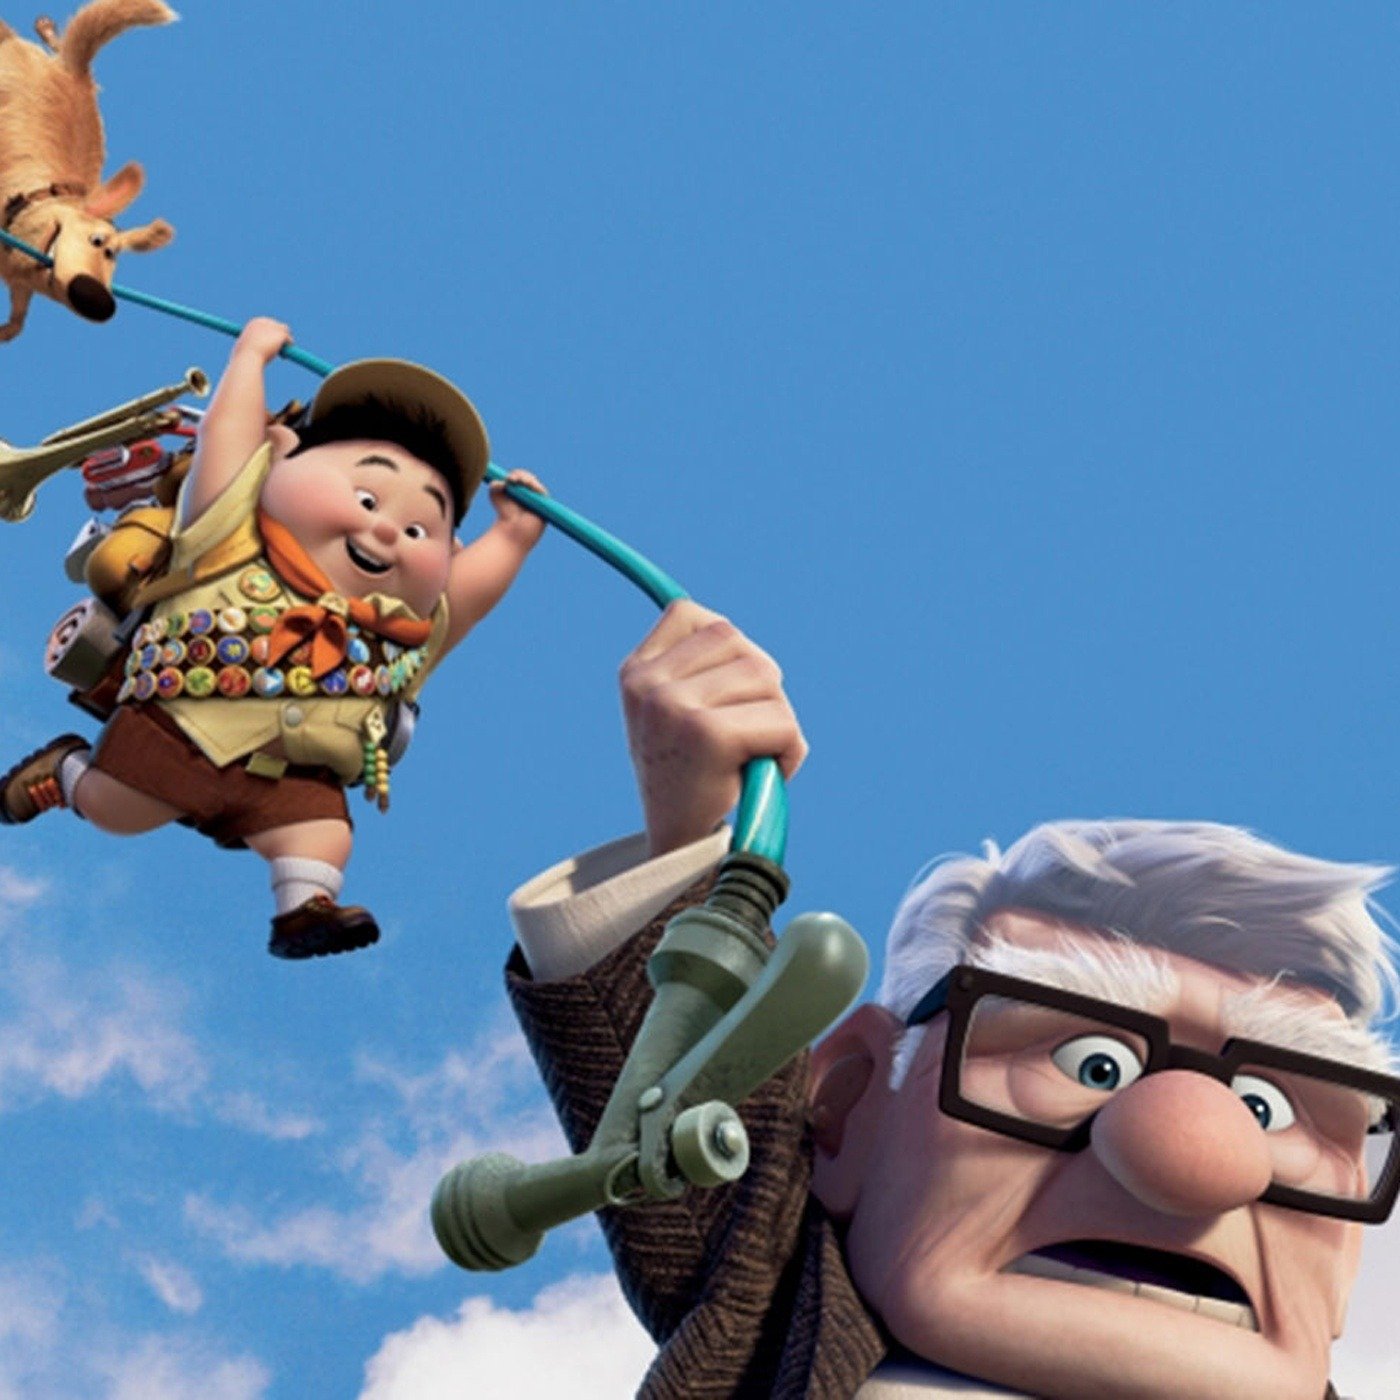 The Saddest Animated Movies That Make You Cry